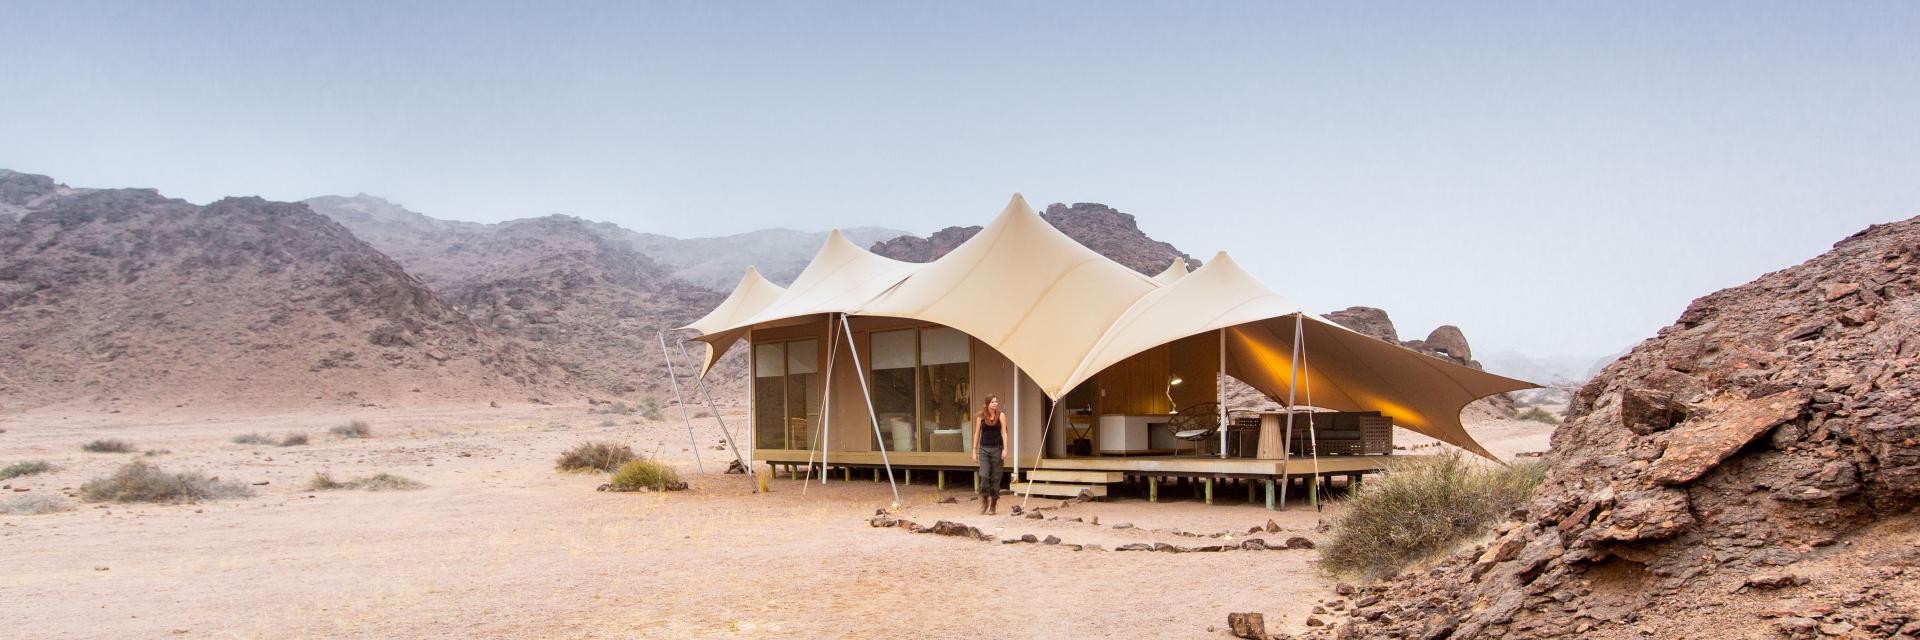 A view of one of the guest tents at Hoanib Skeleton Coast.